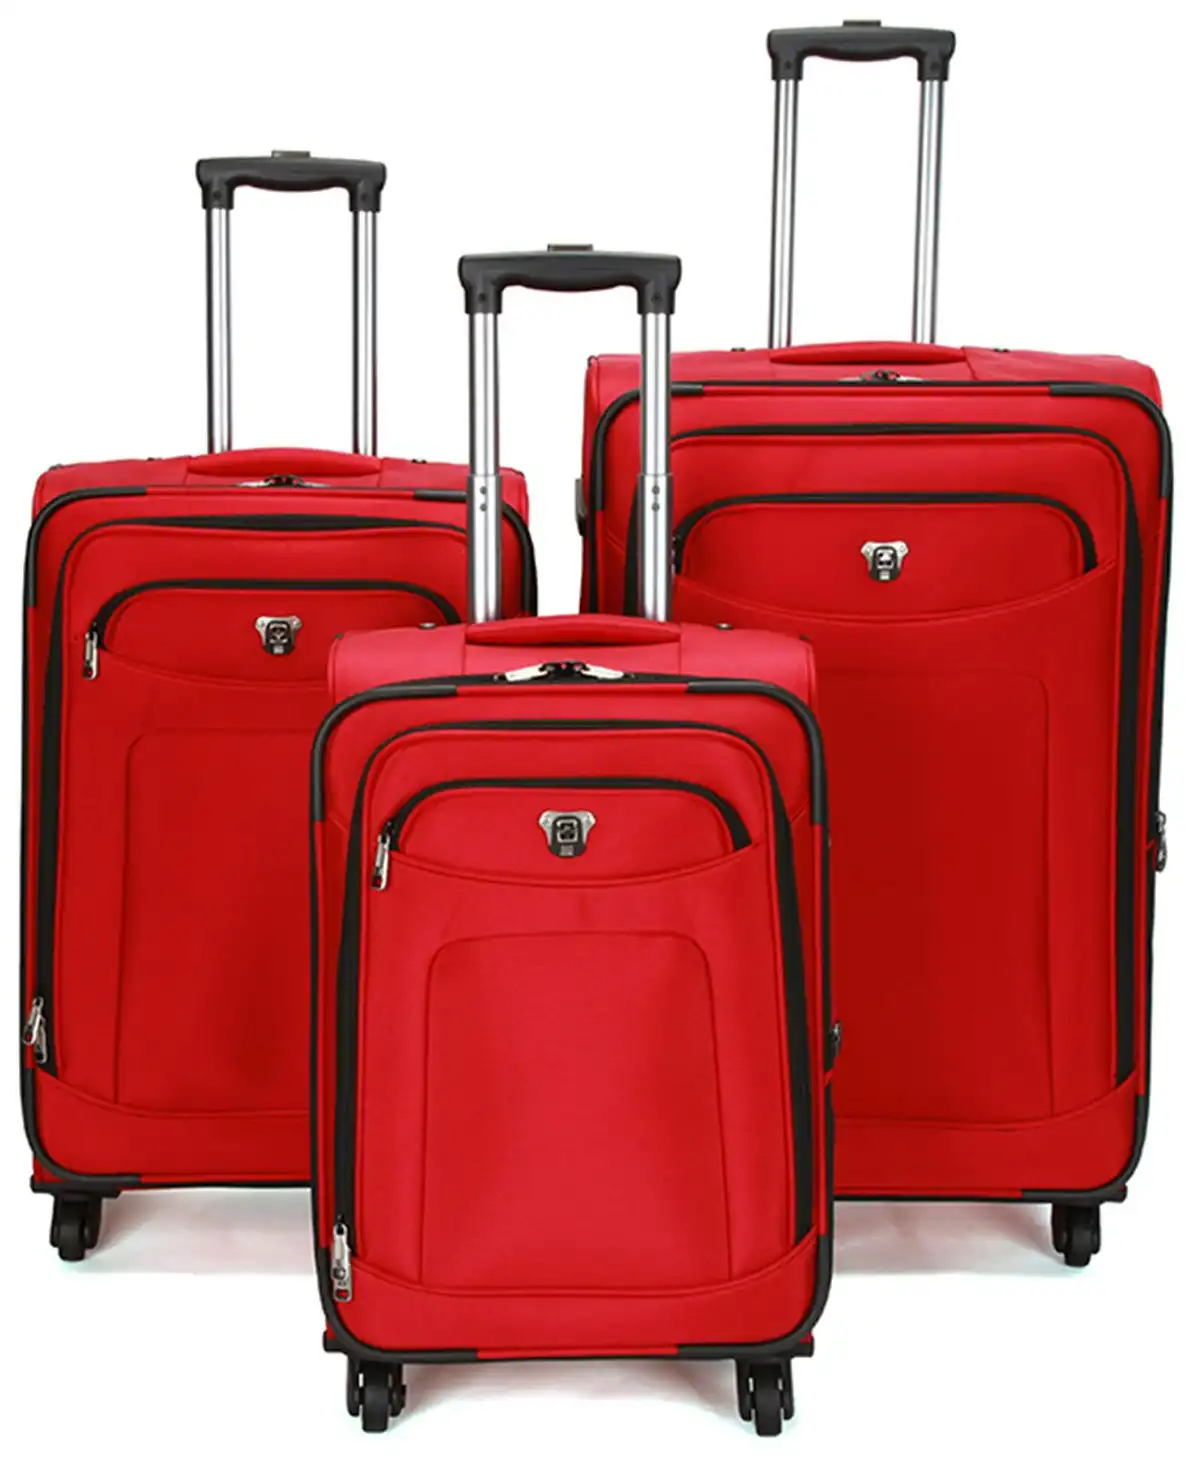 Suissewin Swiss Luggage Suitcase Lightweight with 8 wheel 360 degree rolling SoftCase 3PCS Set SN8109ABC Red